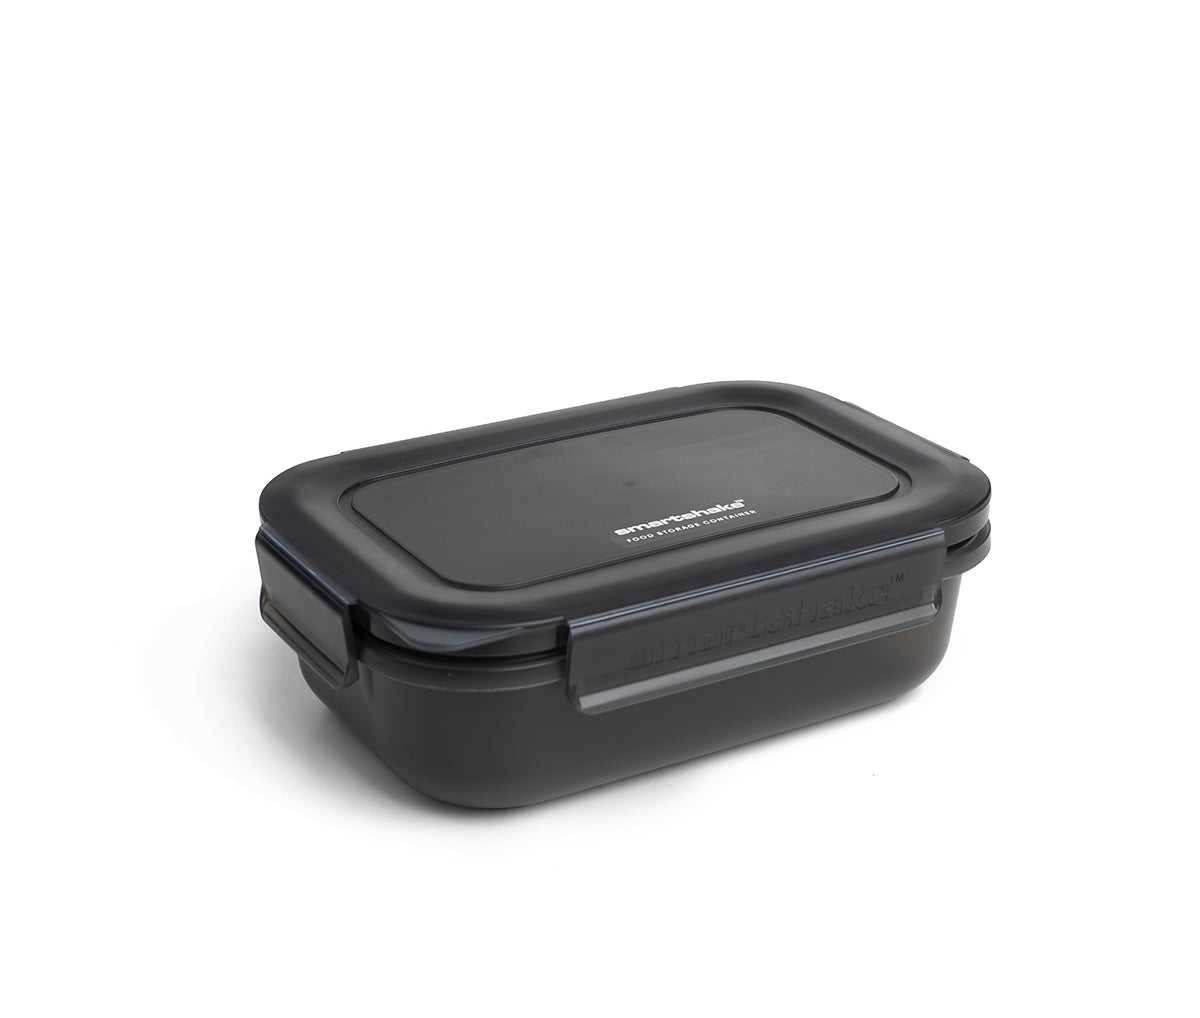 2-pack Food Storage Containers with 50% off